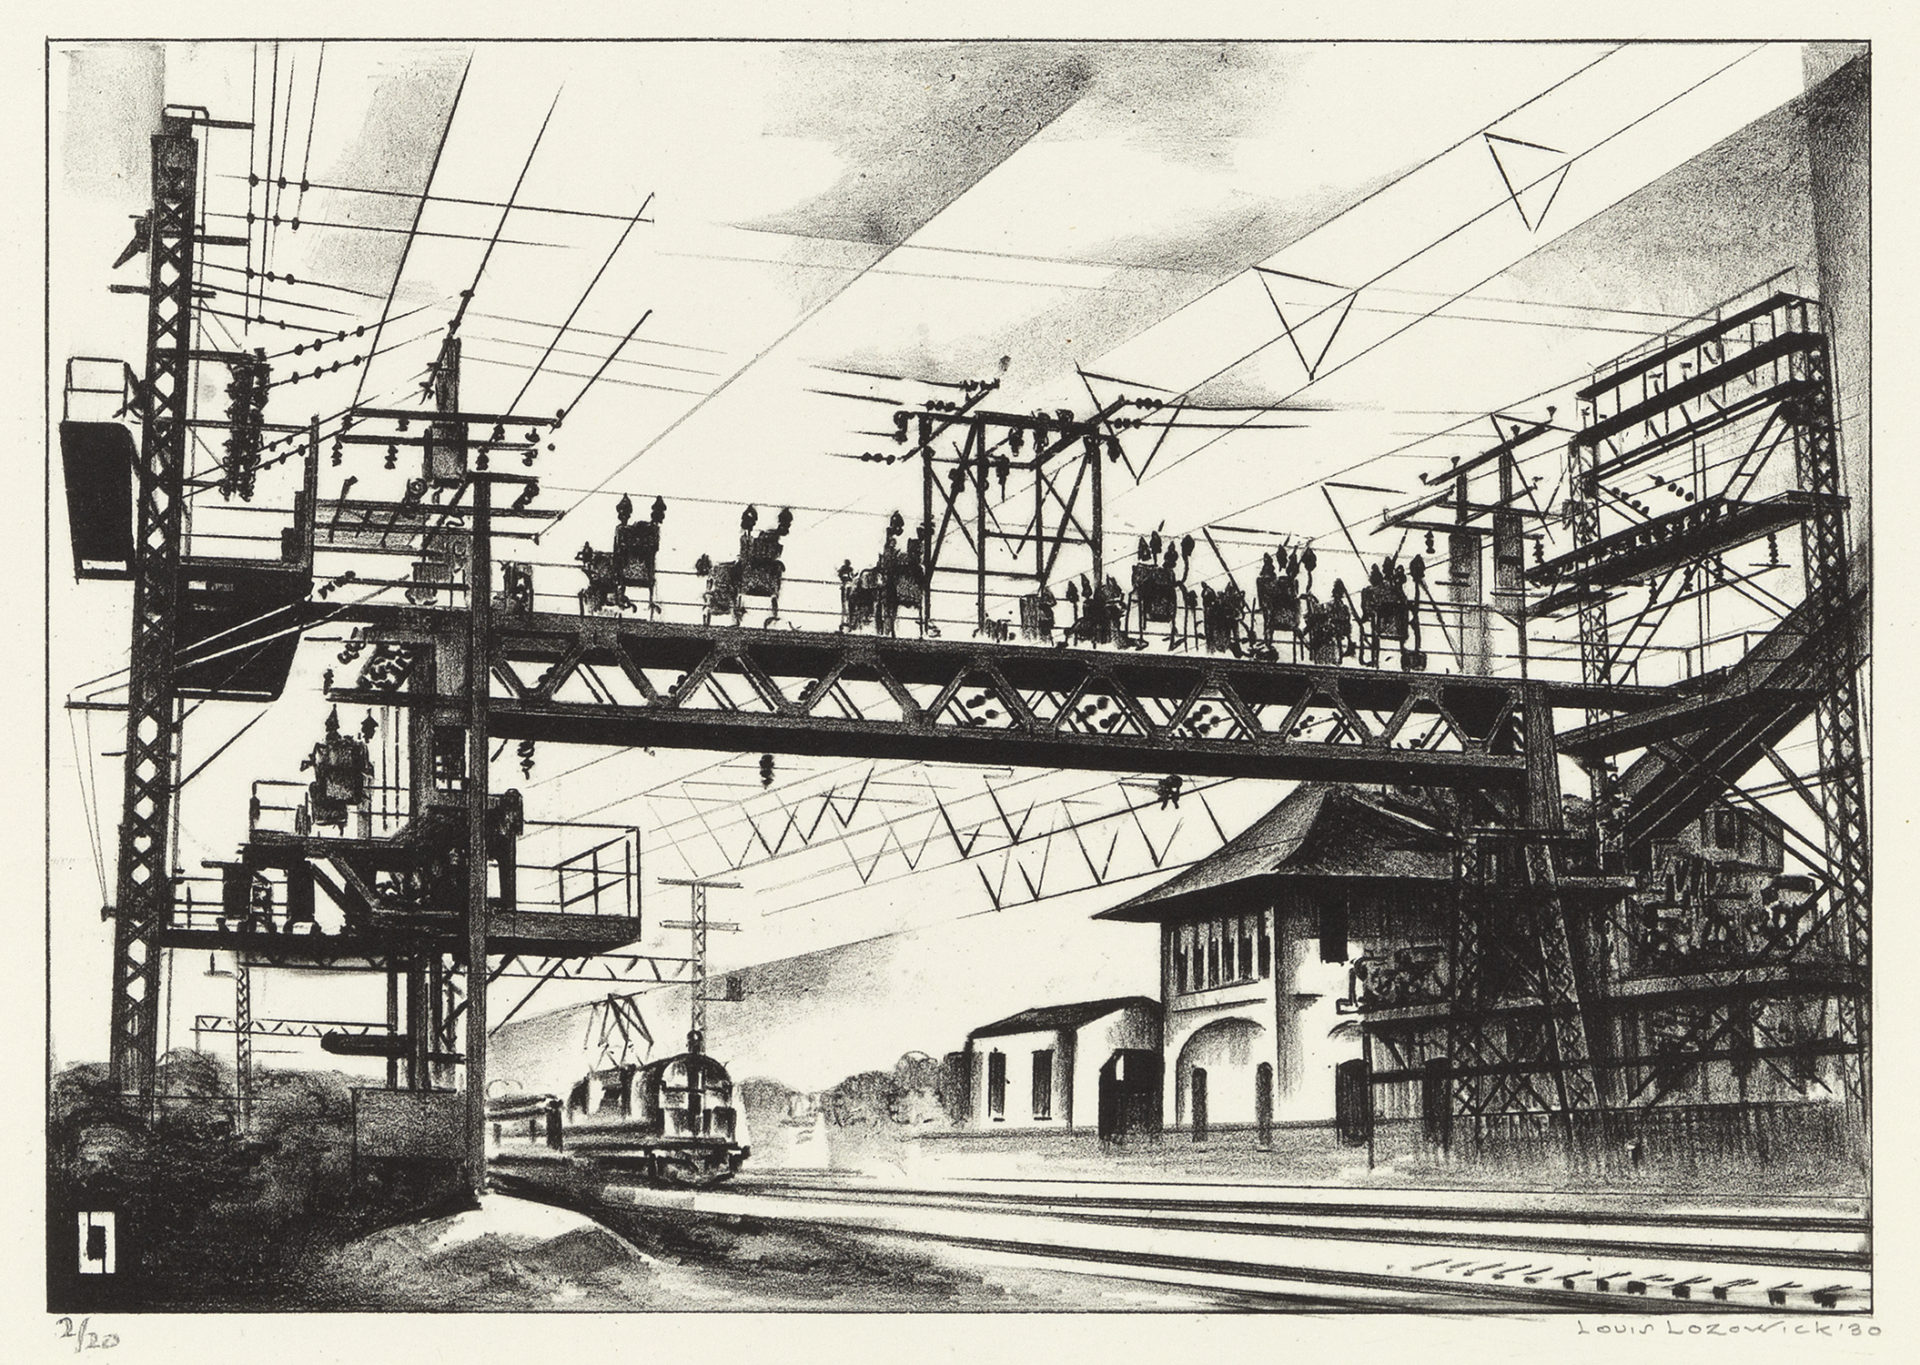 High Voltage Cos Cob, 1929, Lithograph, 6 9/16 x 9 7/16 inches (16.7 x 24 cm), Edition of 20